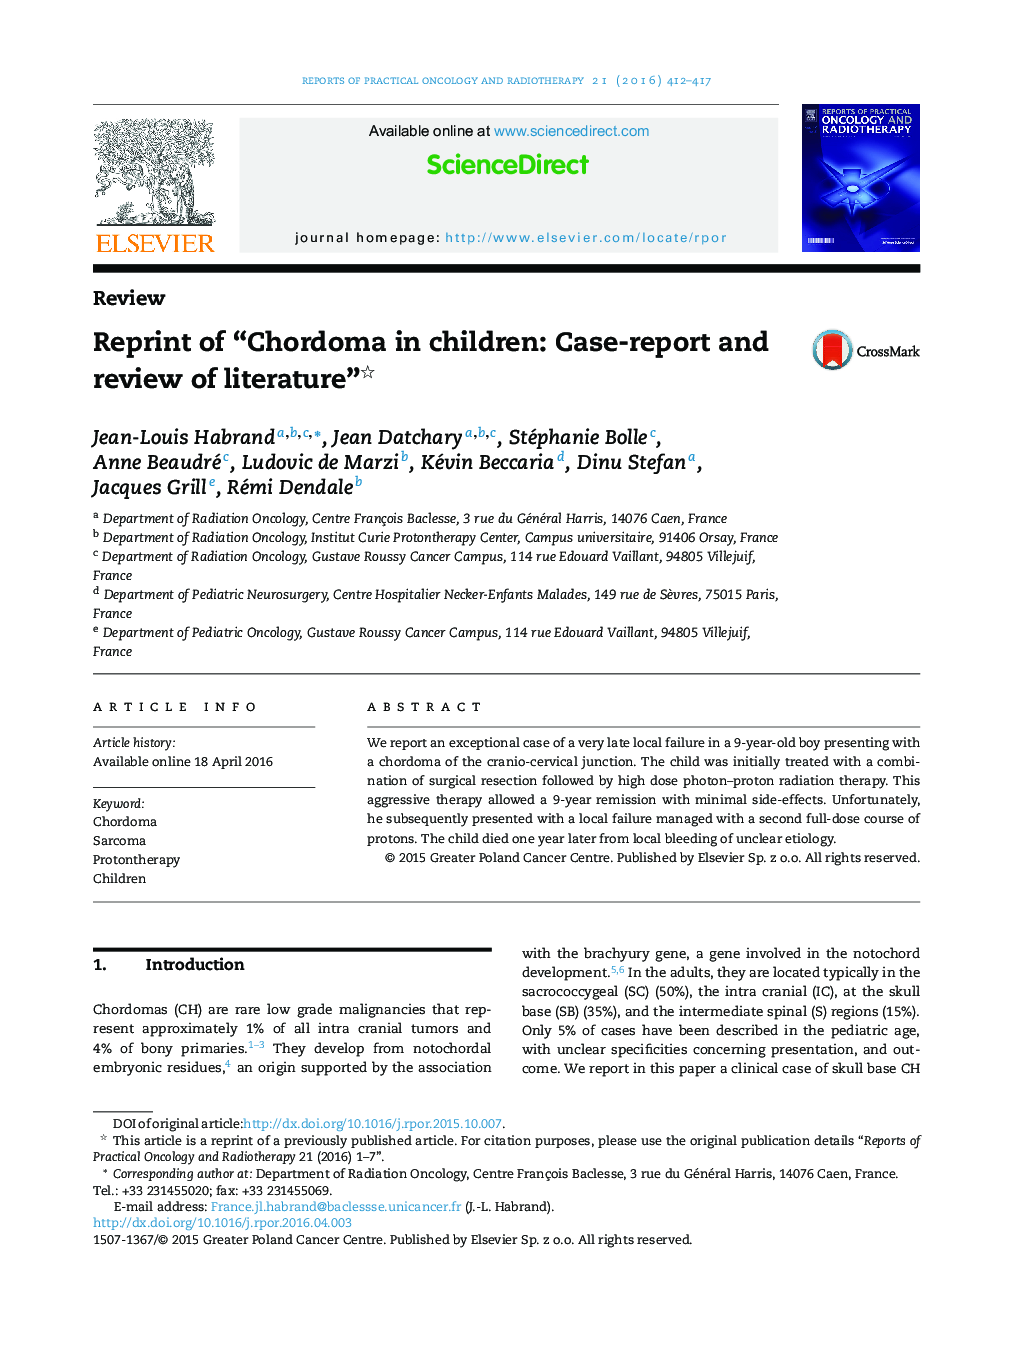 Reprint of “Chordoma in children: Case-report and review of literature” 